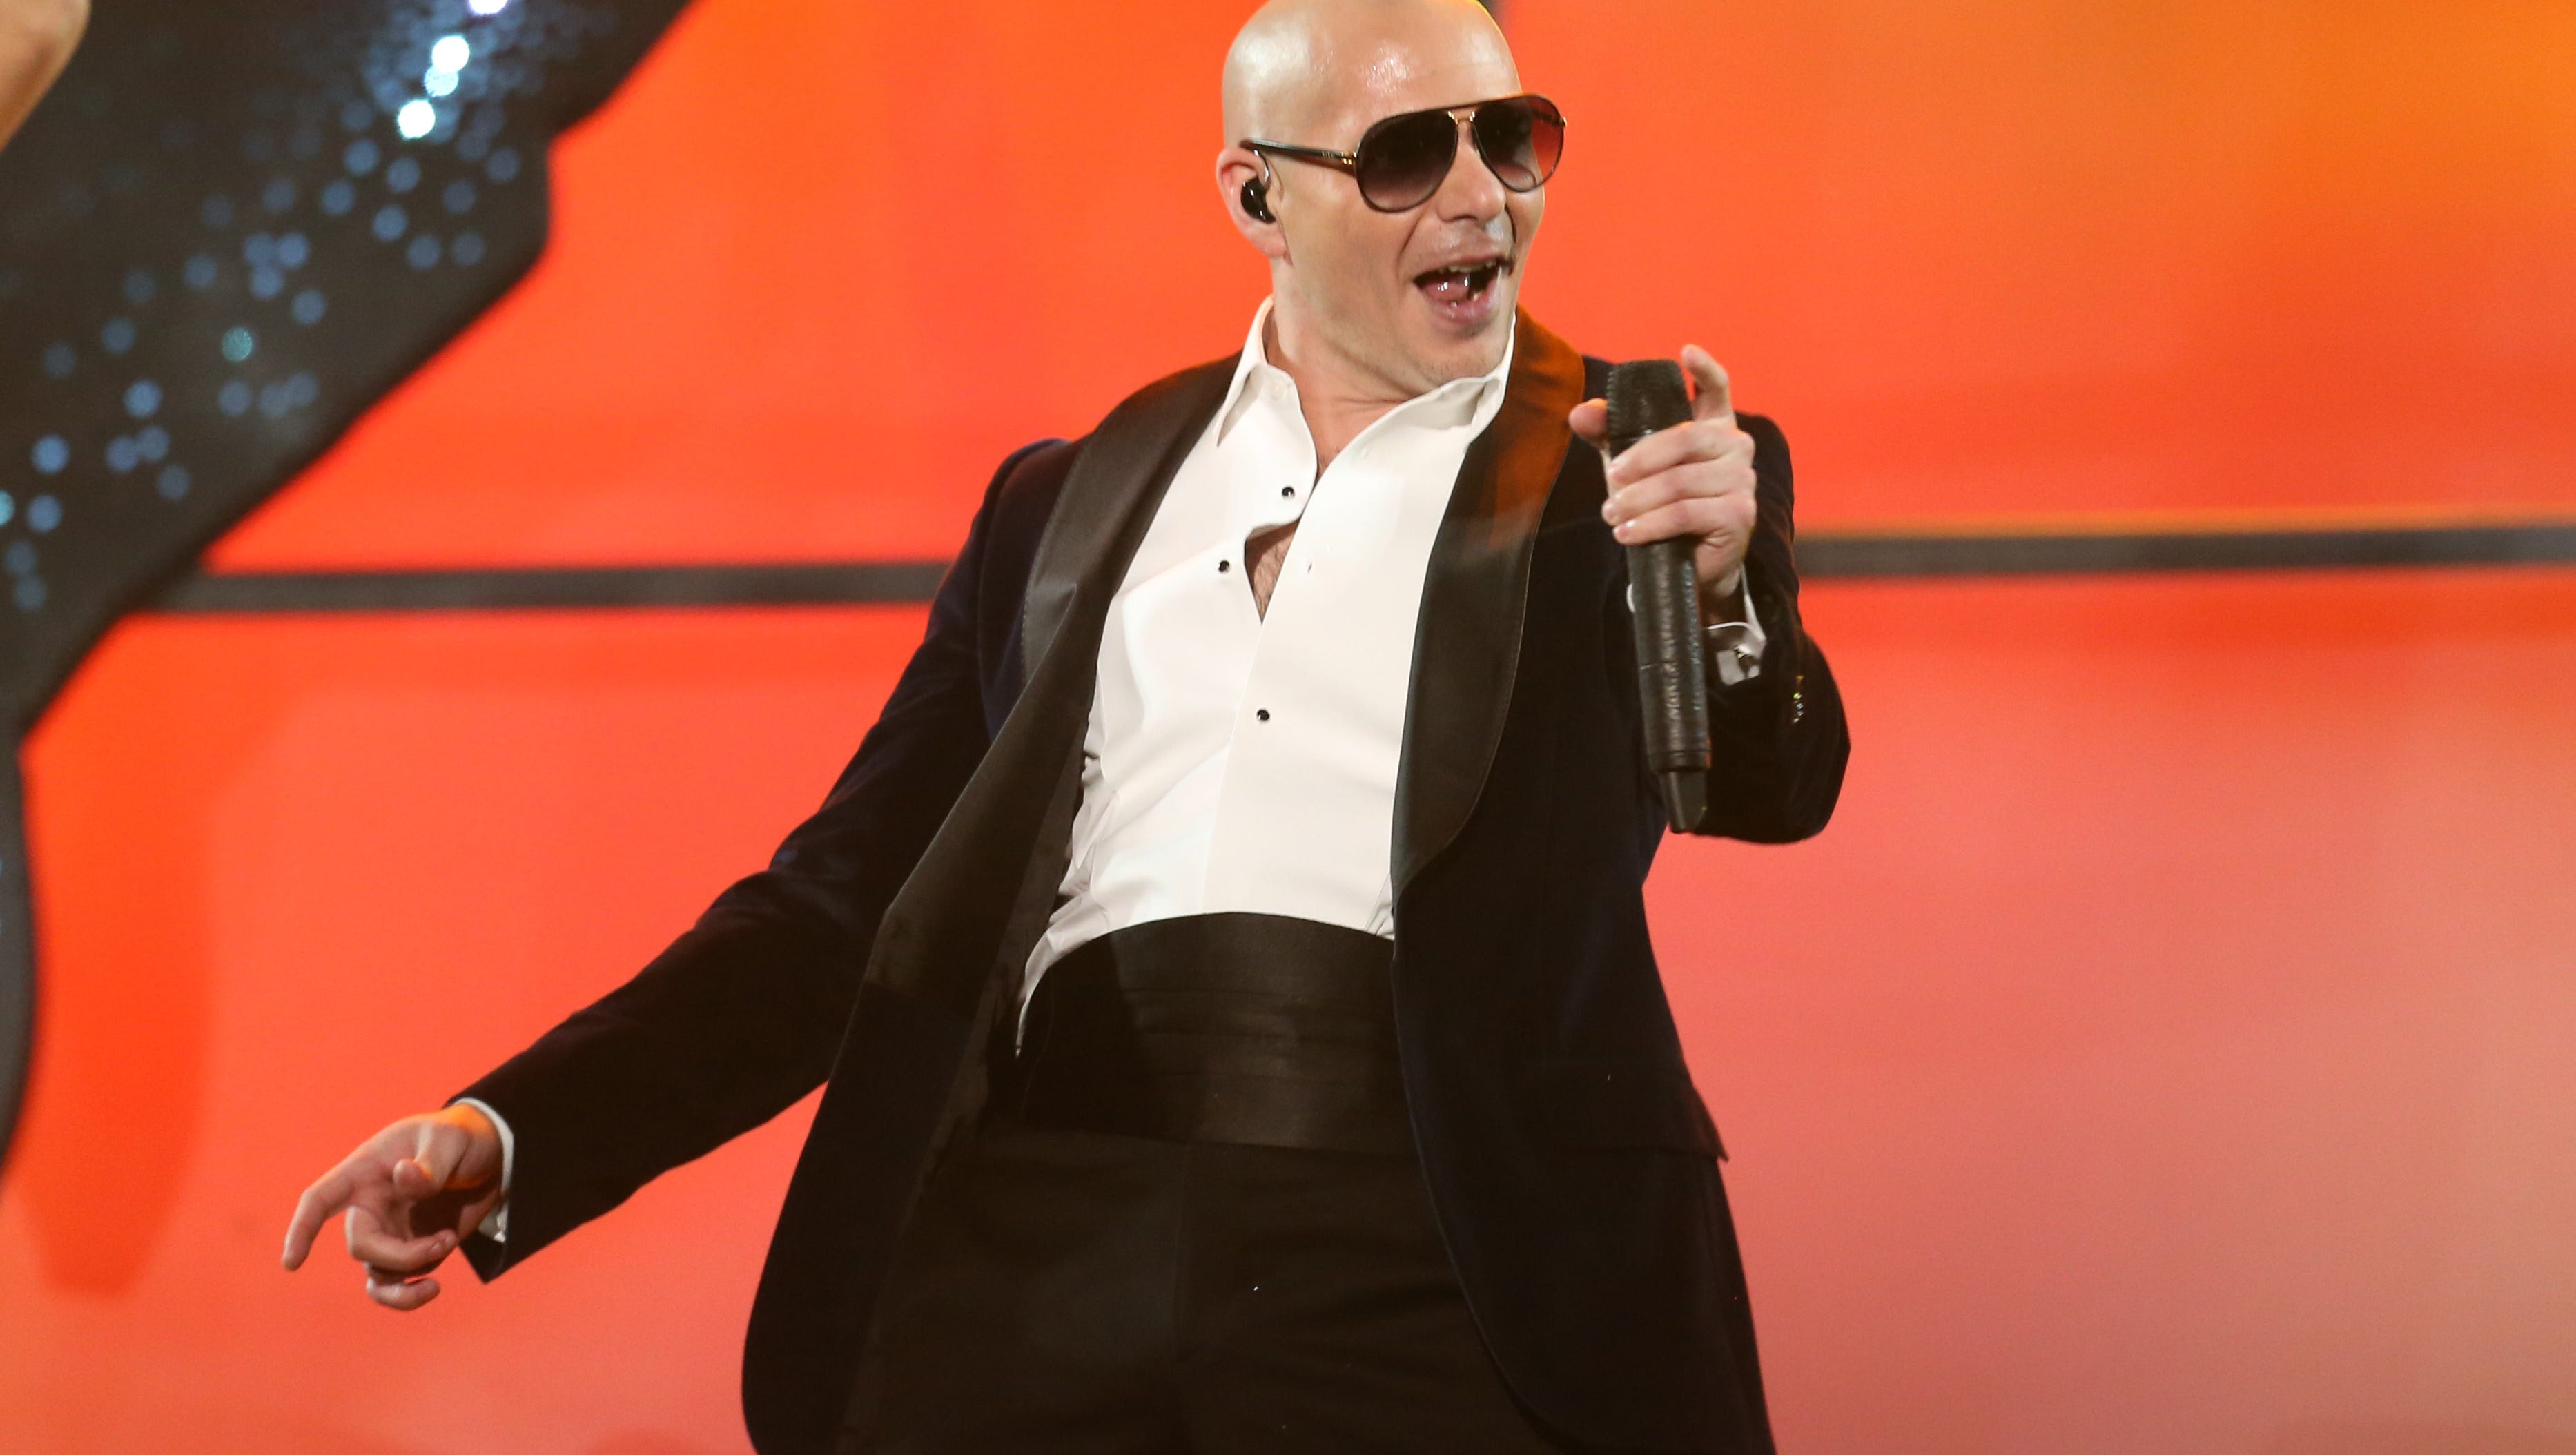 A cruise ship godfather? Rapper Pitbull to name next Norwegian vessel